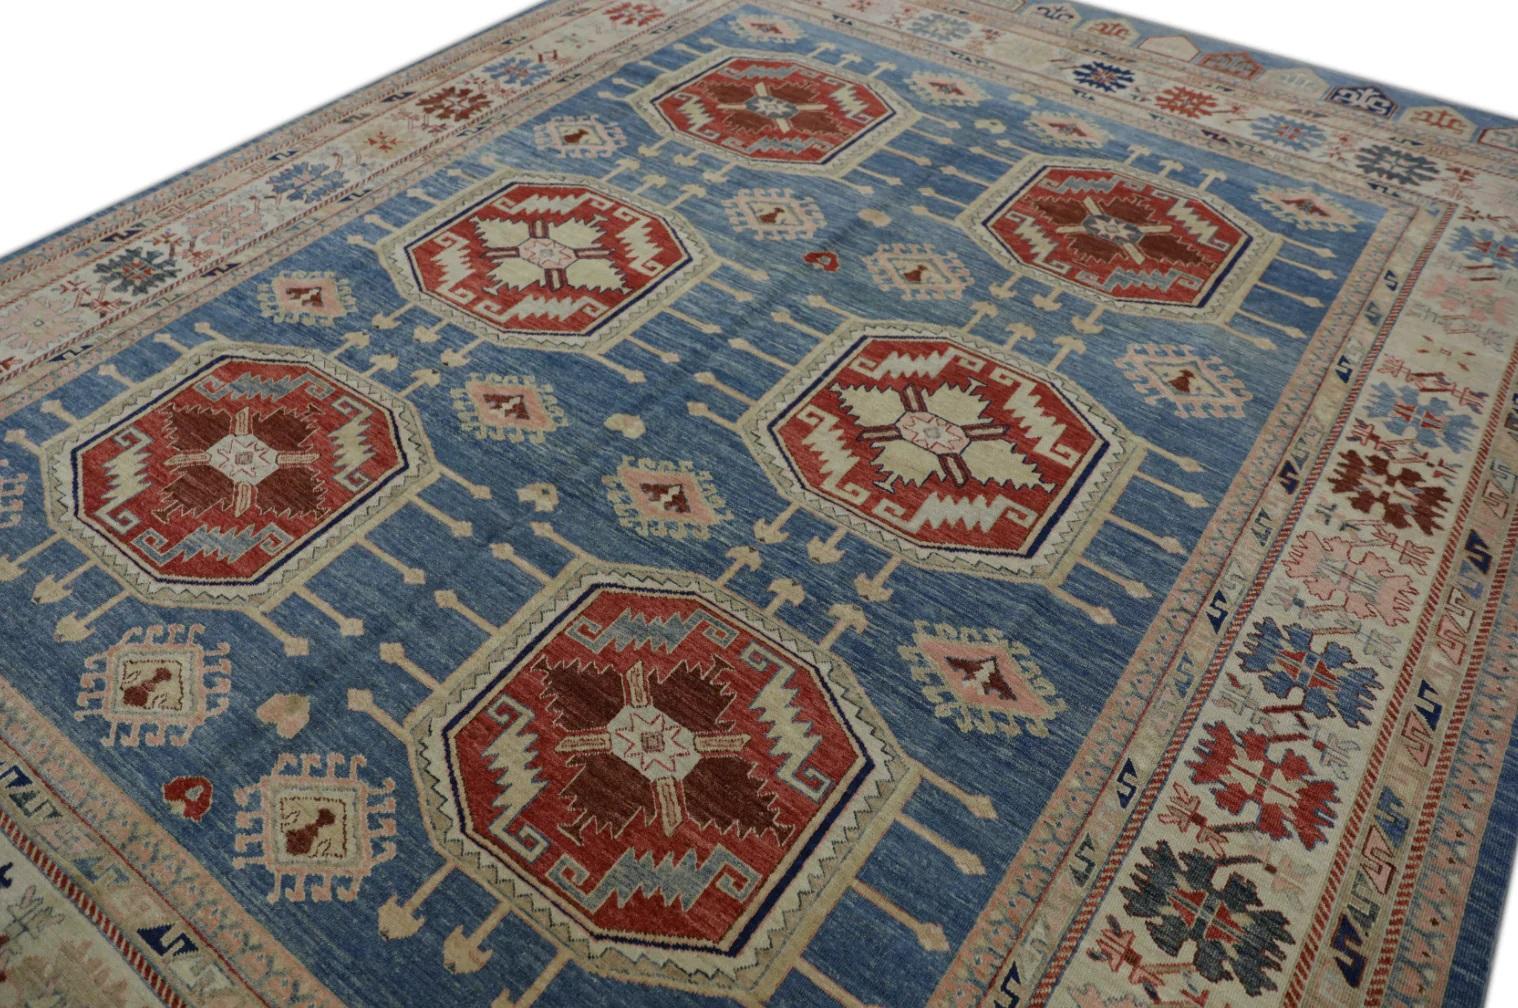 This modern finewoven Turkish Oushak rug is a stunning piece of art that has been handwoven using traditional techniques by skilled artisans. The rug features intricate patterns and a soft color palette that is achieved through the use of natural